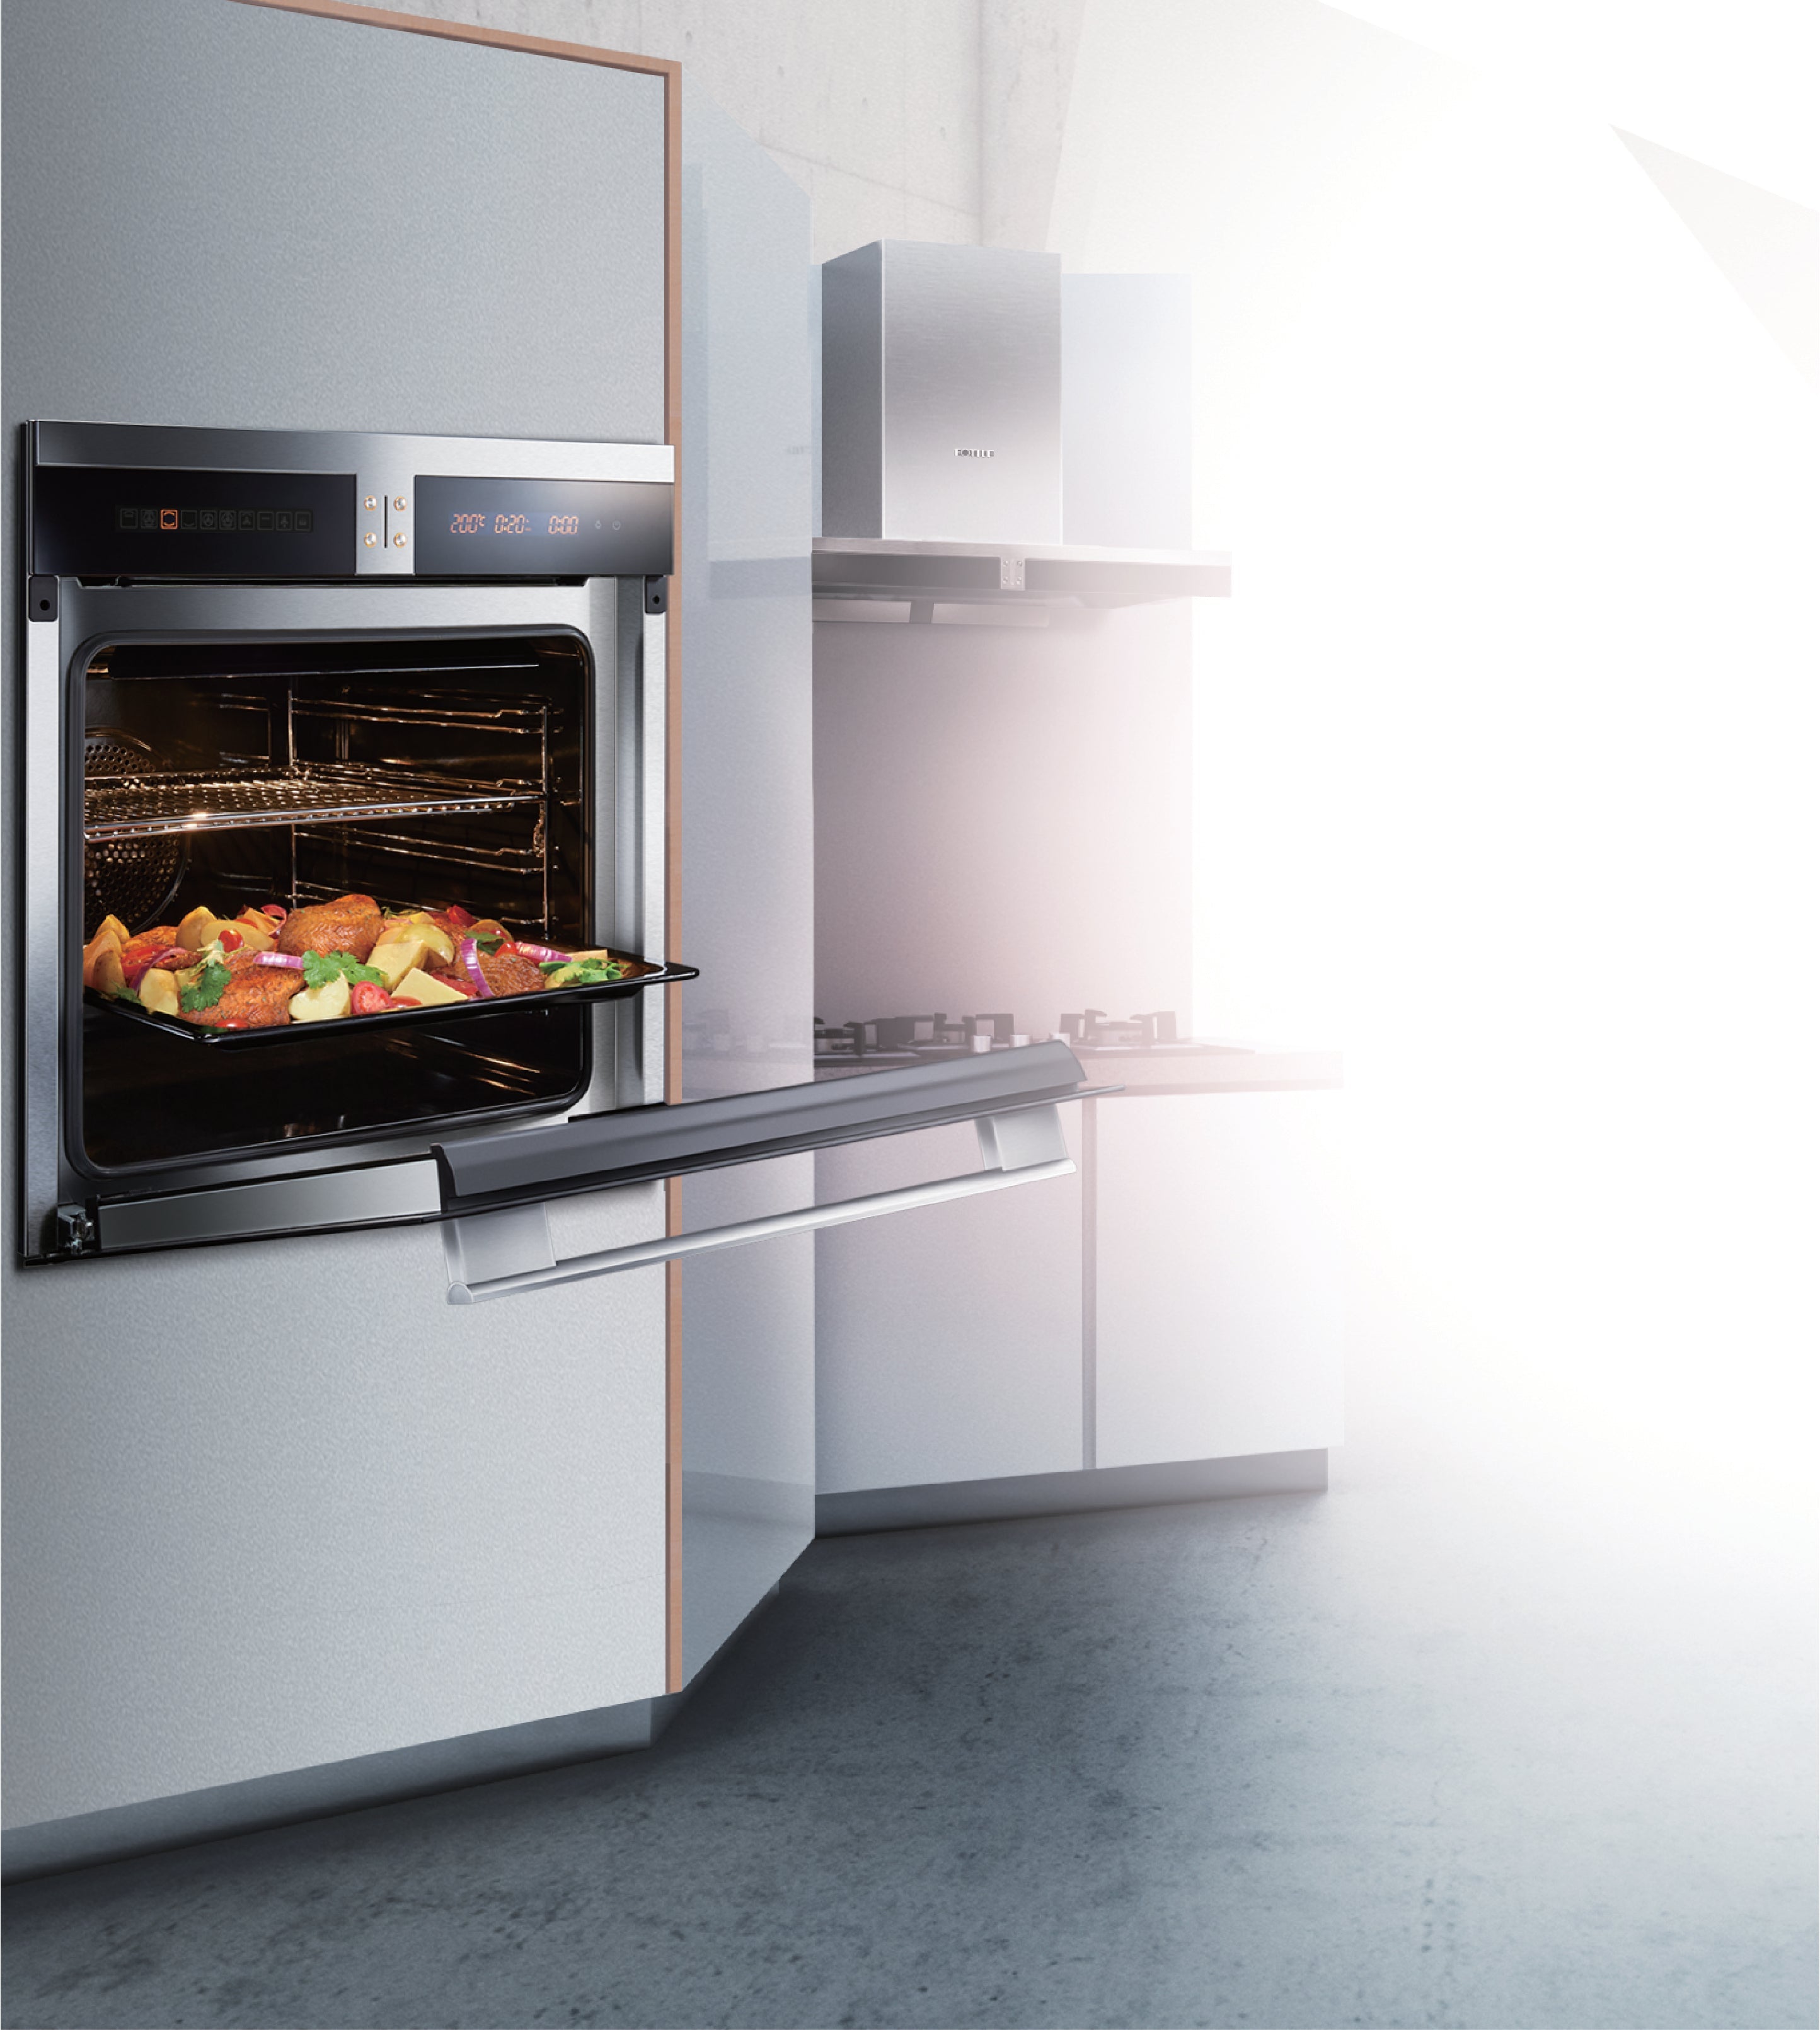 Fotile 24 in. Convection Built-In Electric Wall Oven in Stainless Steel (KSS7002A)